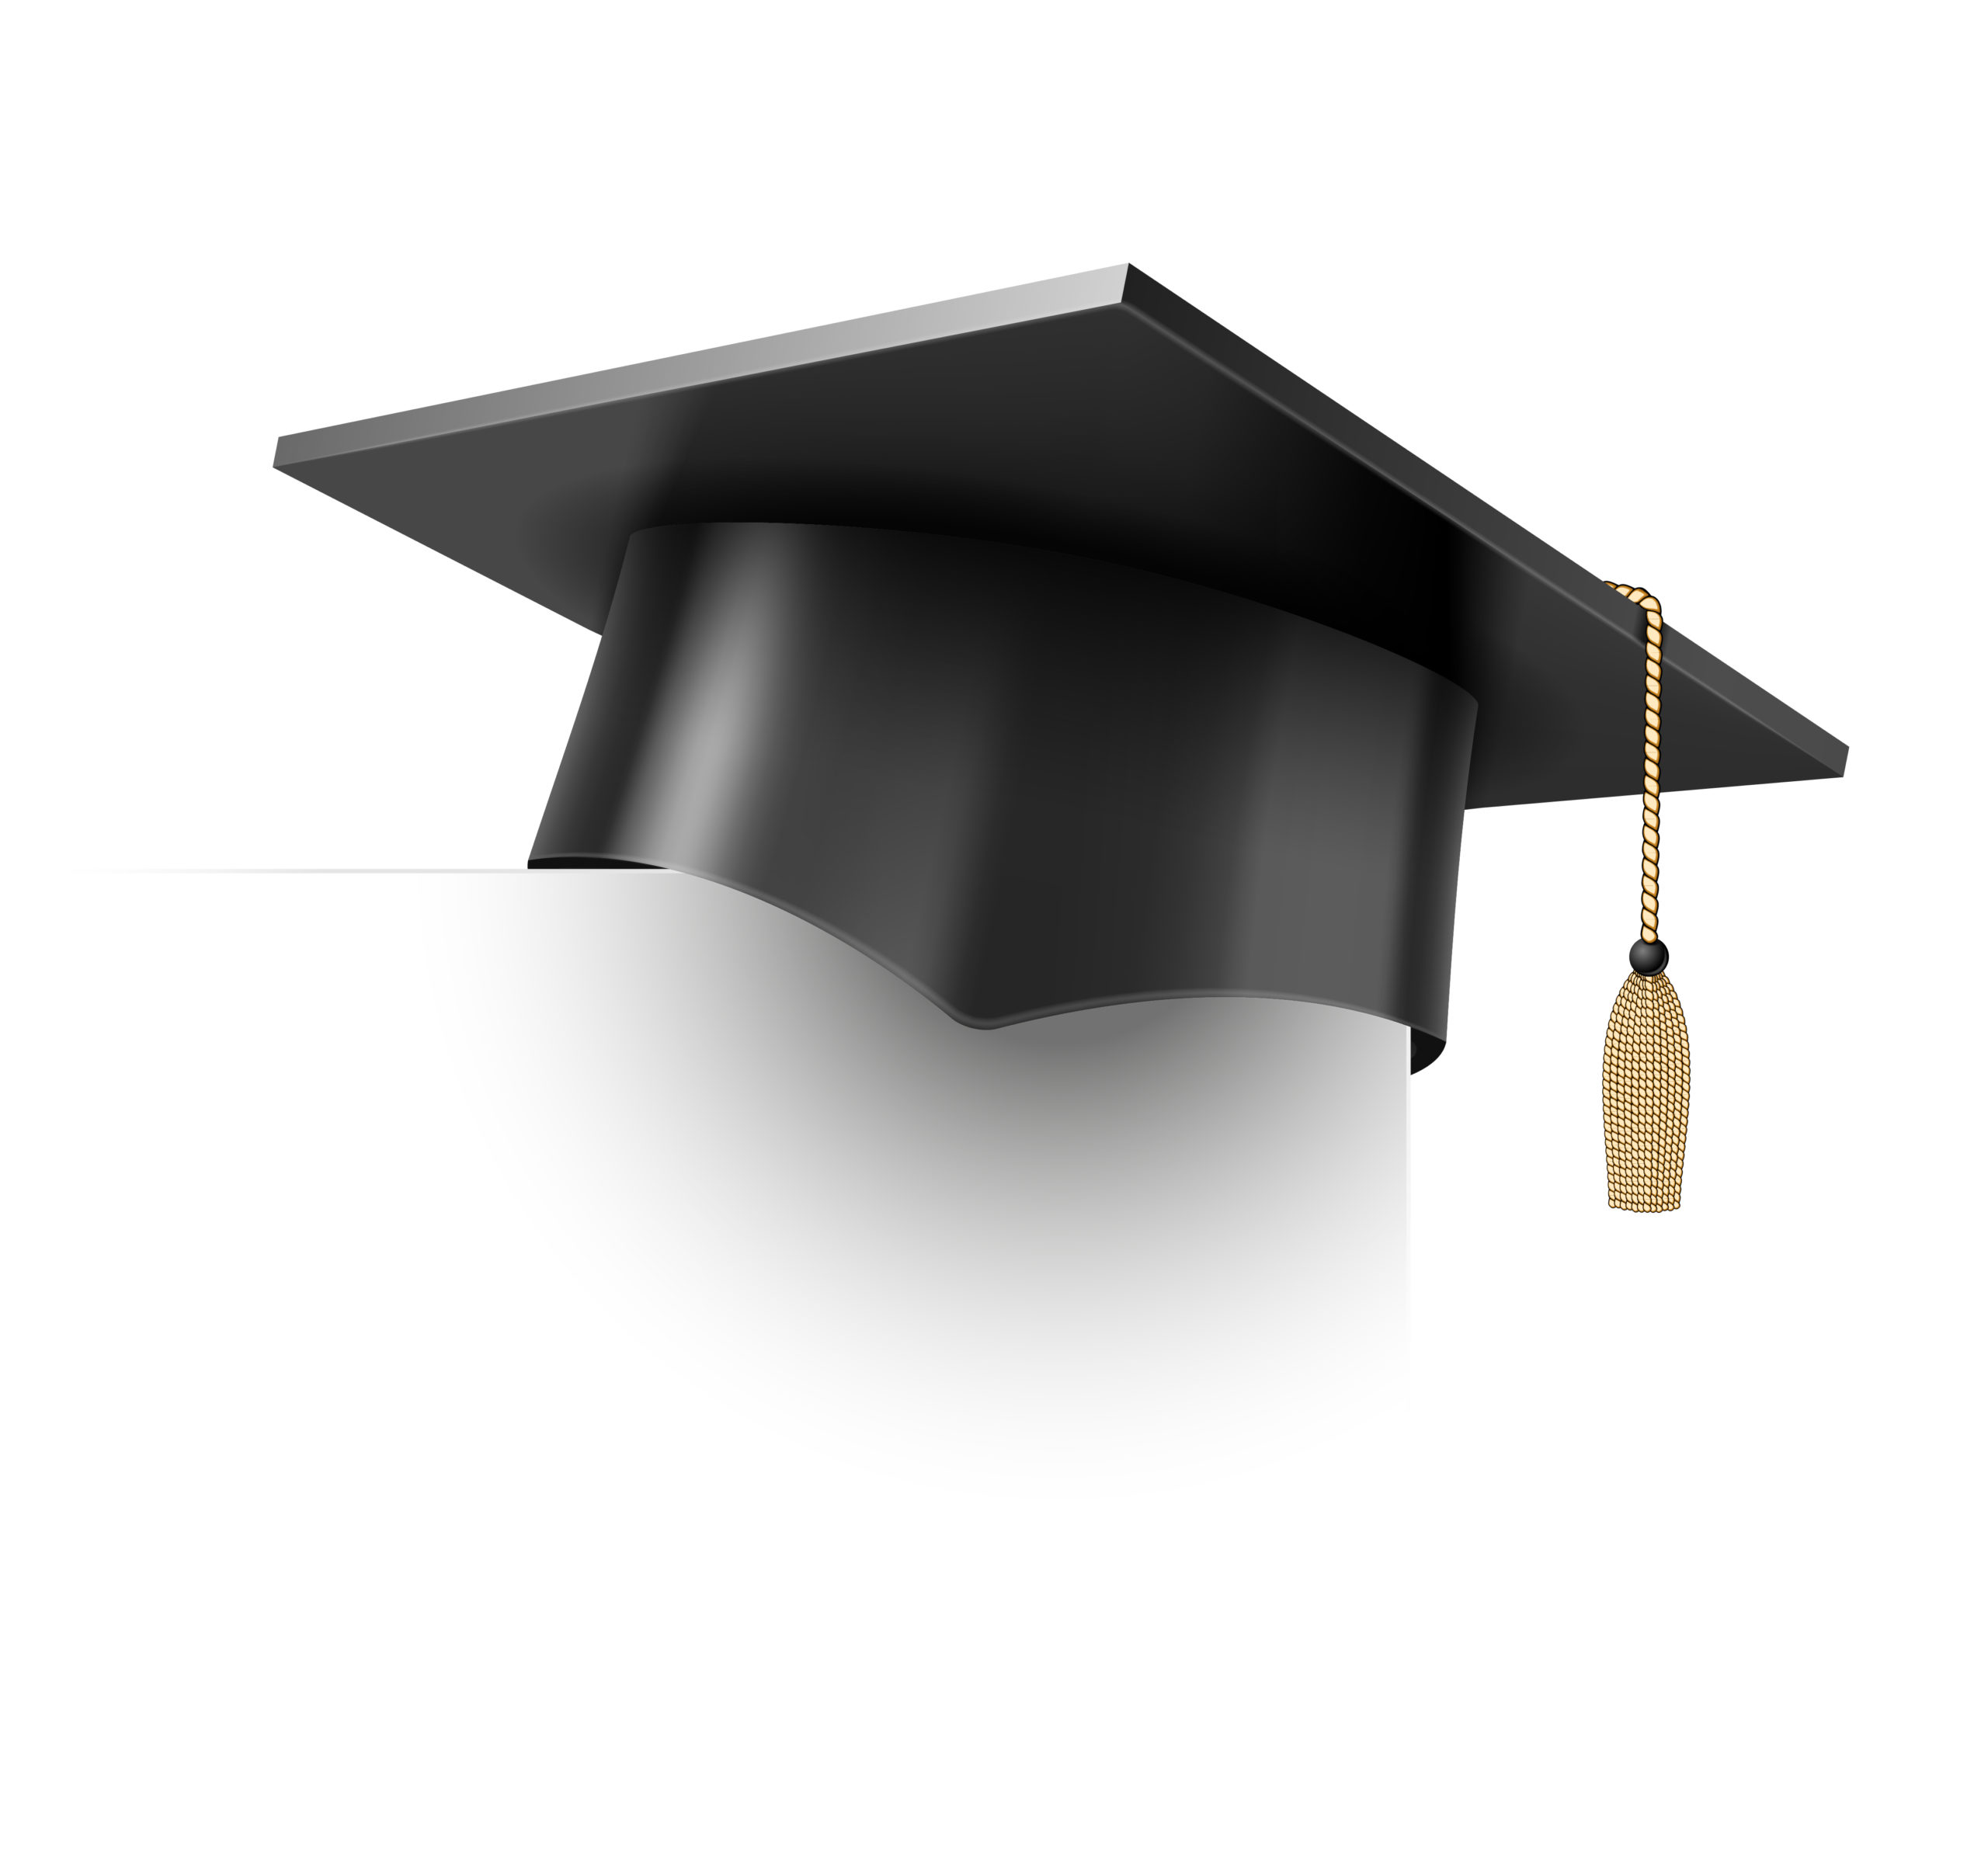 <a href="https://www.freepik.com/free-vector/realistic-vector-education-cup-white_10601469.htm#query=graduation%20clipart&position=8&from_view=keyword&track=ais&uuid=fd0d7c71-6cc9-4785-91f0-56e68594bbb7">Image by macrovector</a> on Freepik